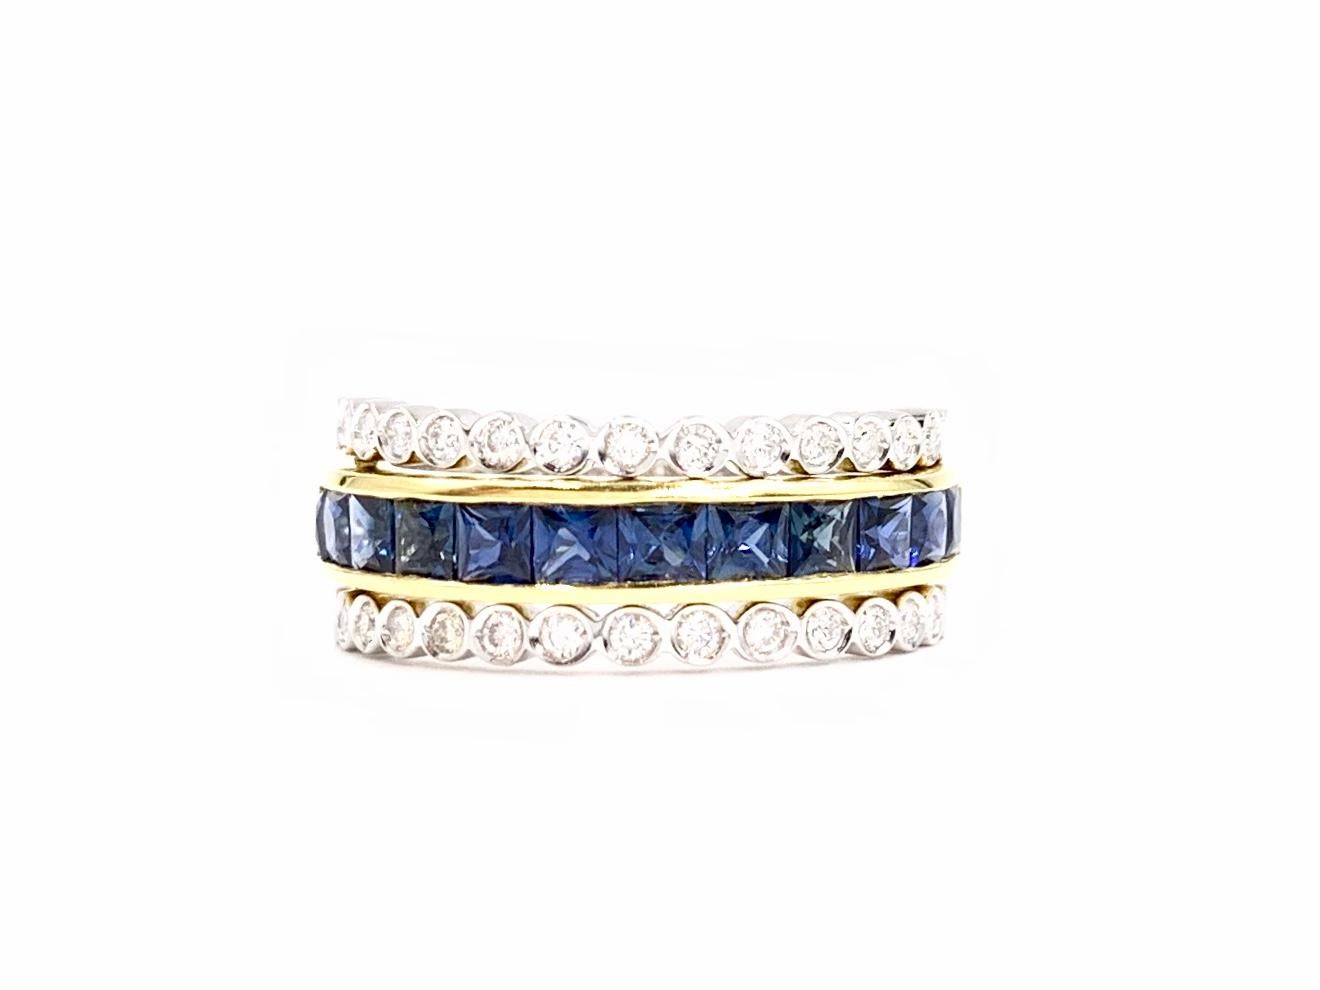 Many looks in one unique and stylish ring! Made in 18 karat yellow and white gold, this versatile ring can be worn a multitude of ways: channel-set princess-cut sapphires or a double row of pave-set diamonds with or without a row of bezel-set